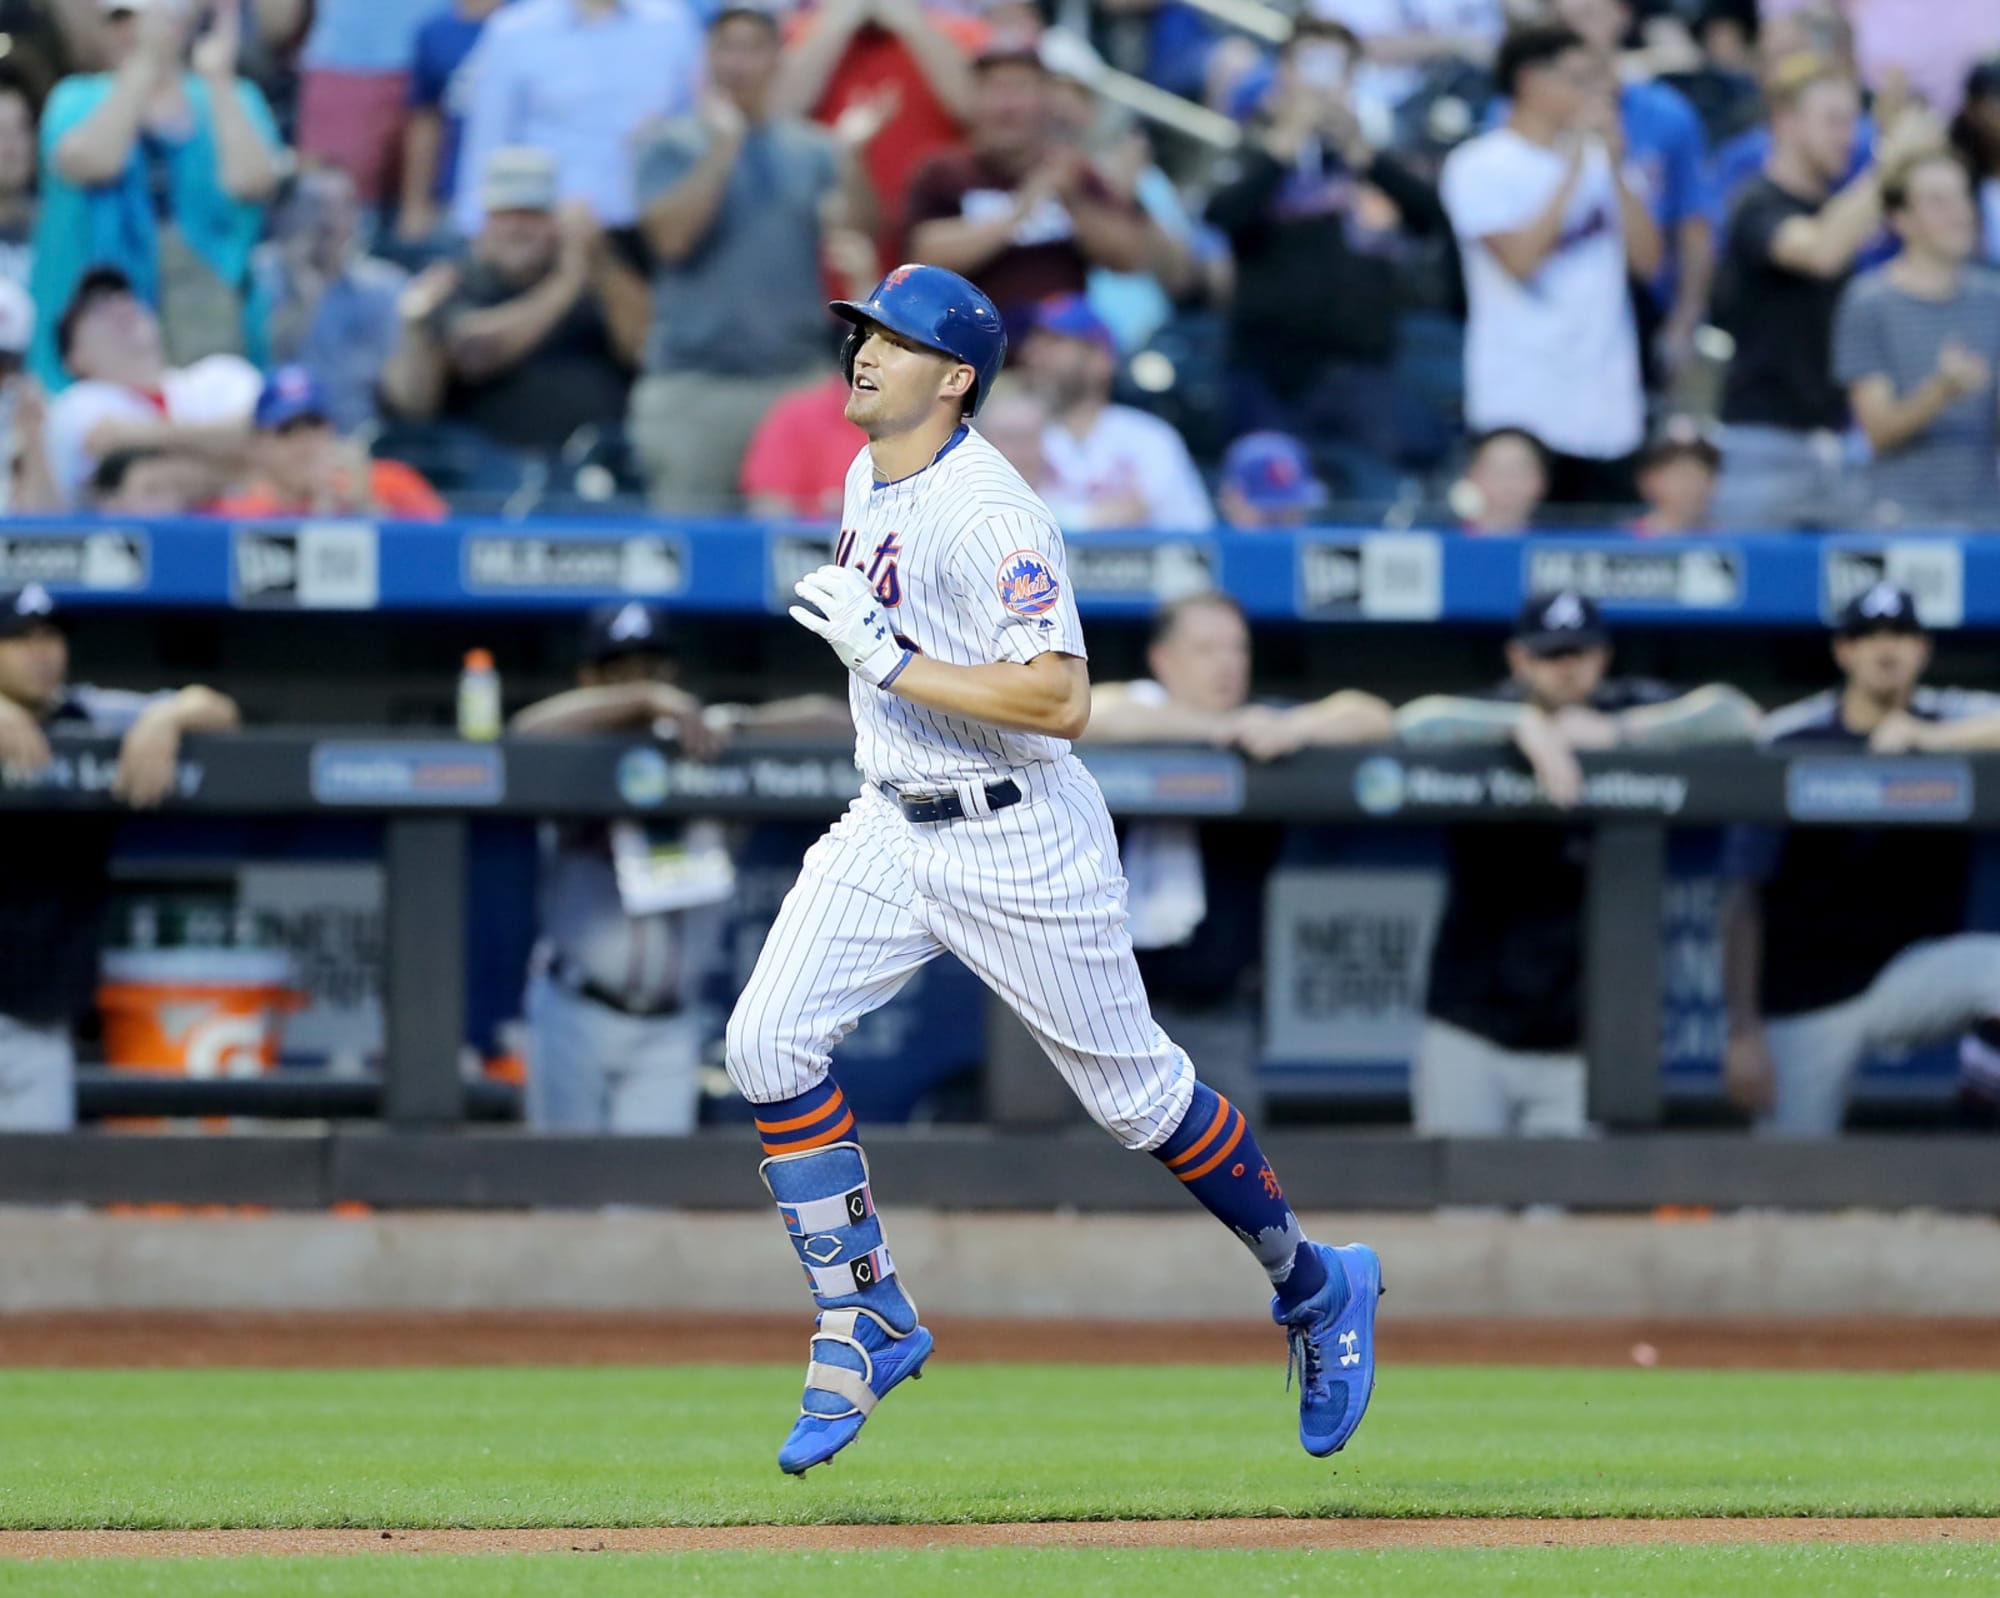 Mets outfielder Brandon Nimmo may be the new master of walkoff hits